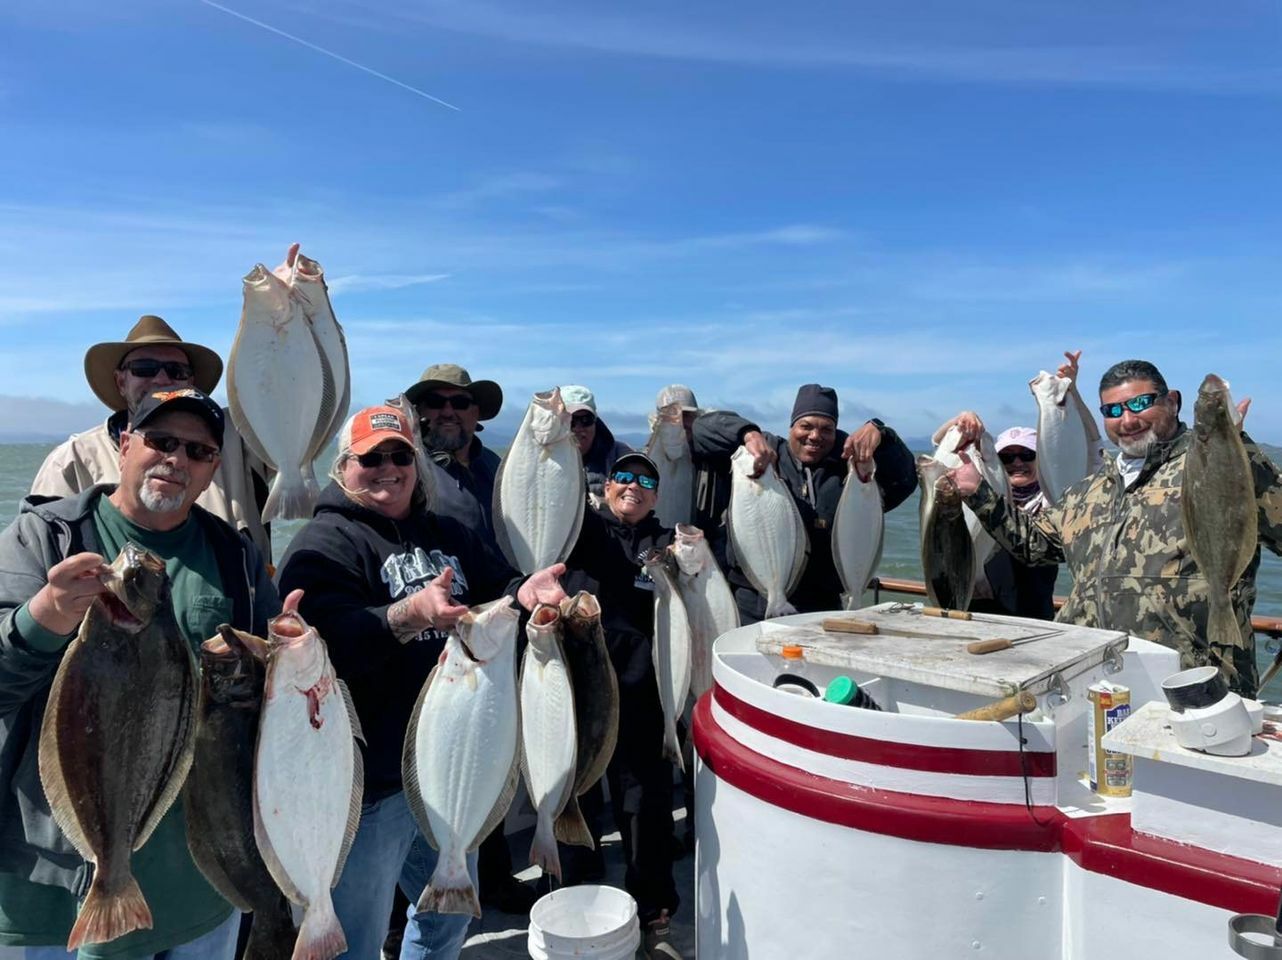 What a epic day of spring time halibut fishing!